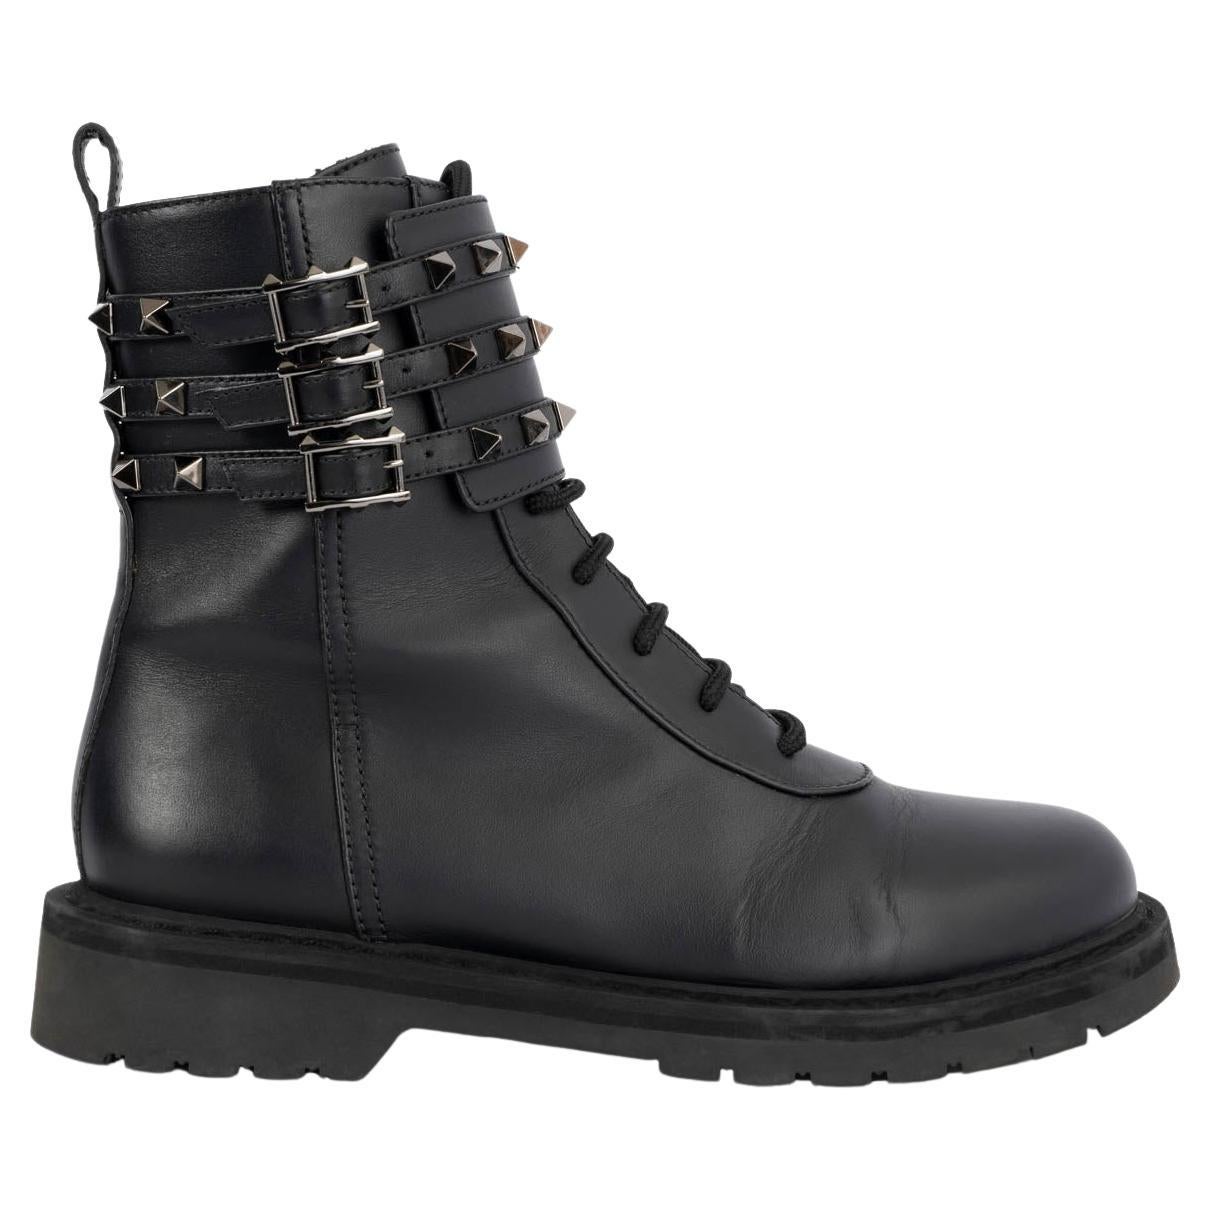 VALENTINO black leather ROCKSTUD BUCKLE Combat Boots Shoes 39.5 For Sale